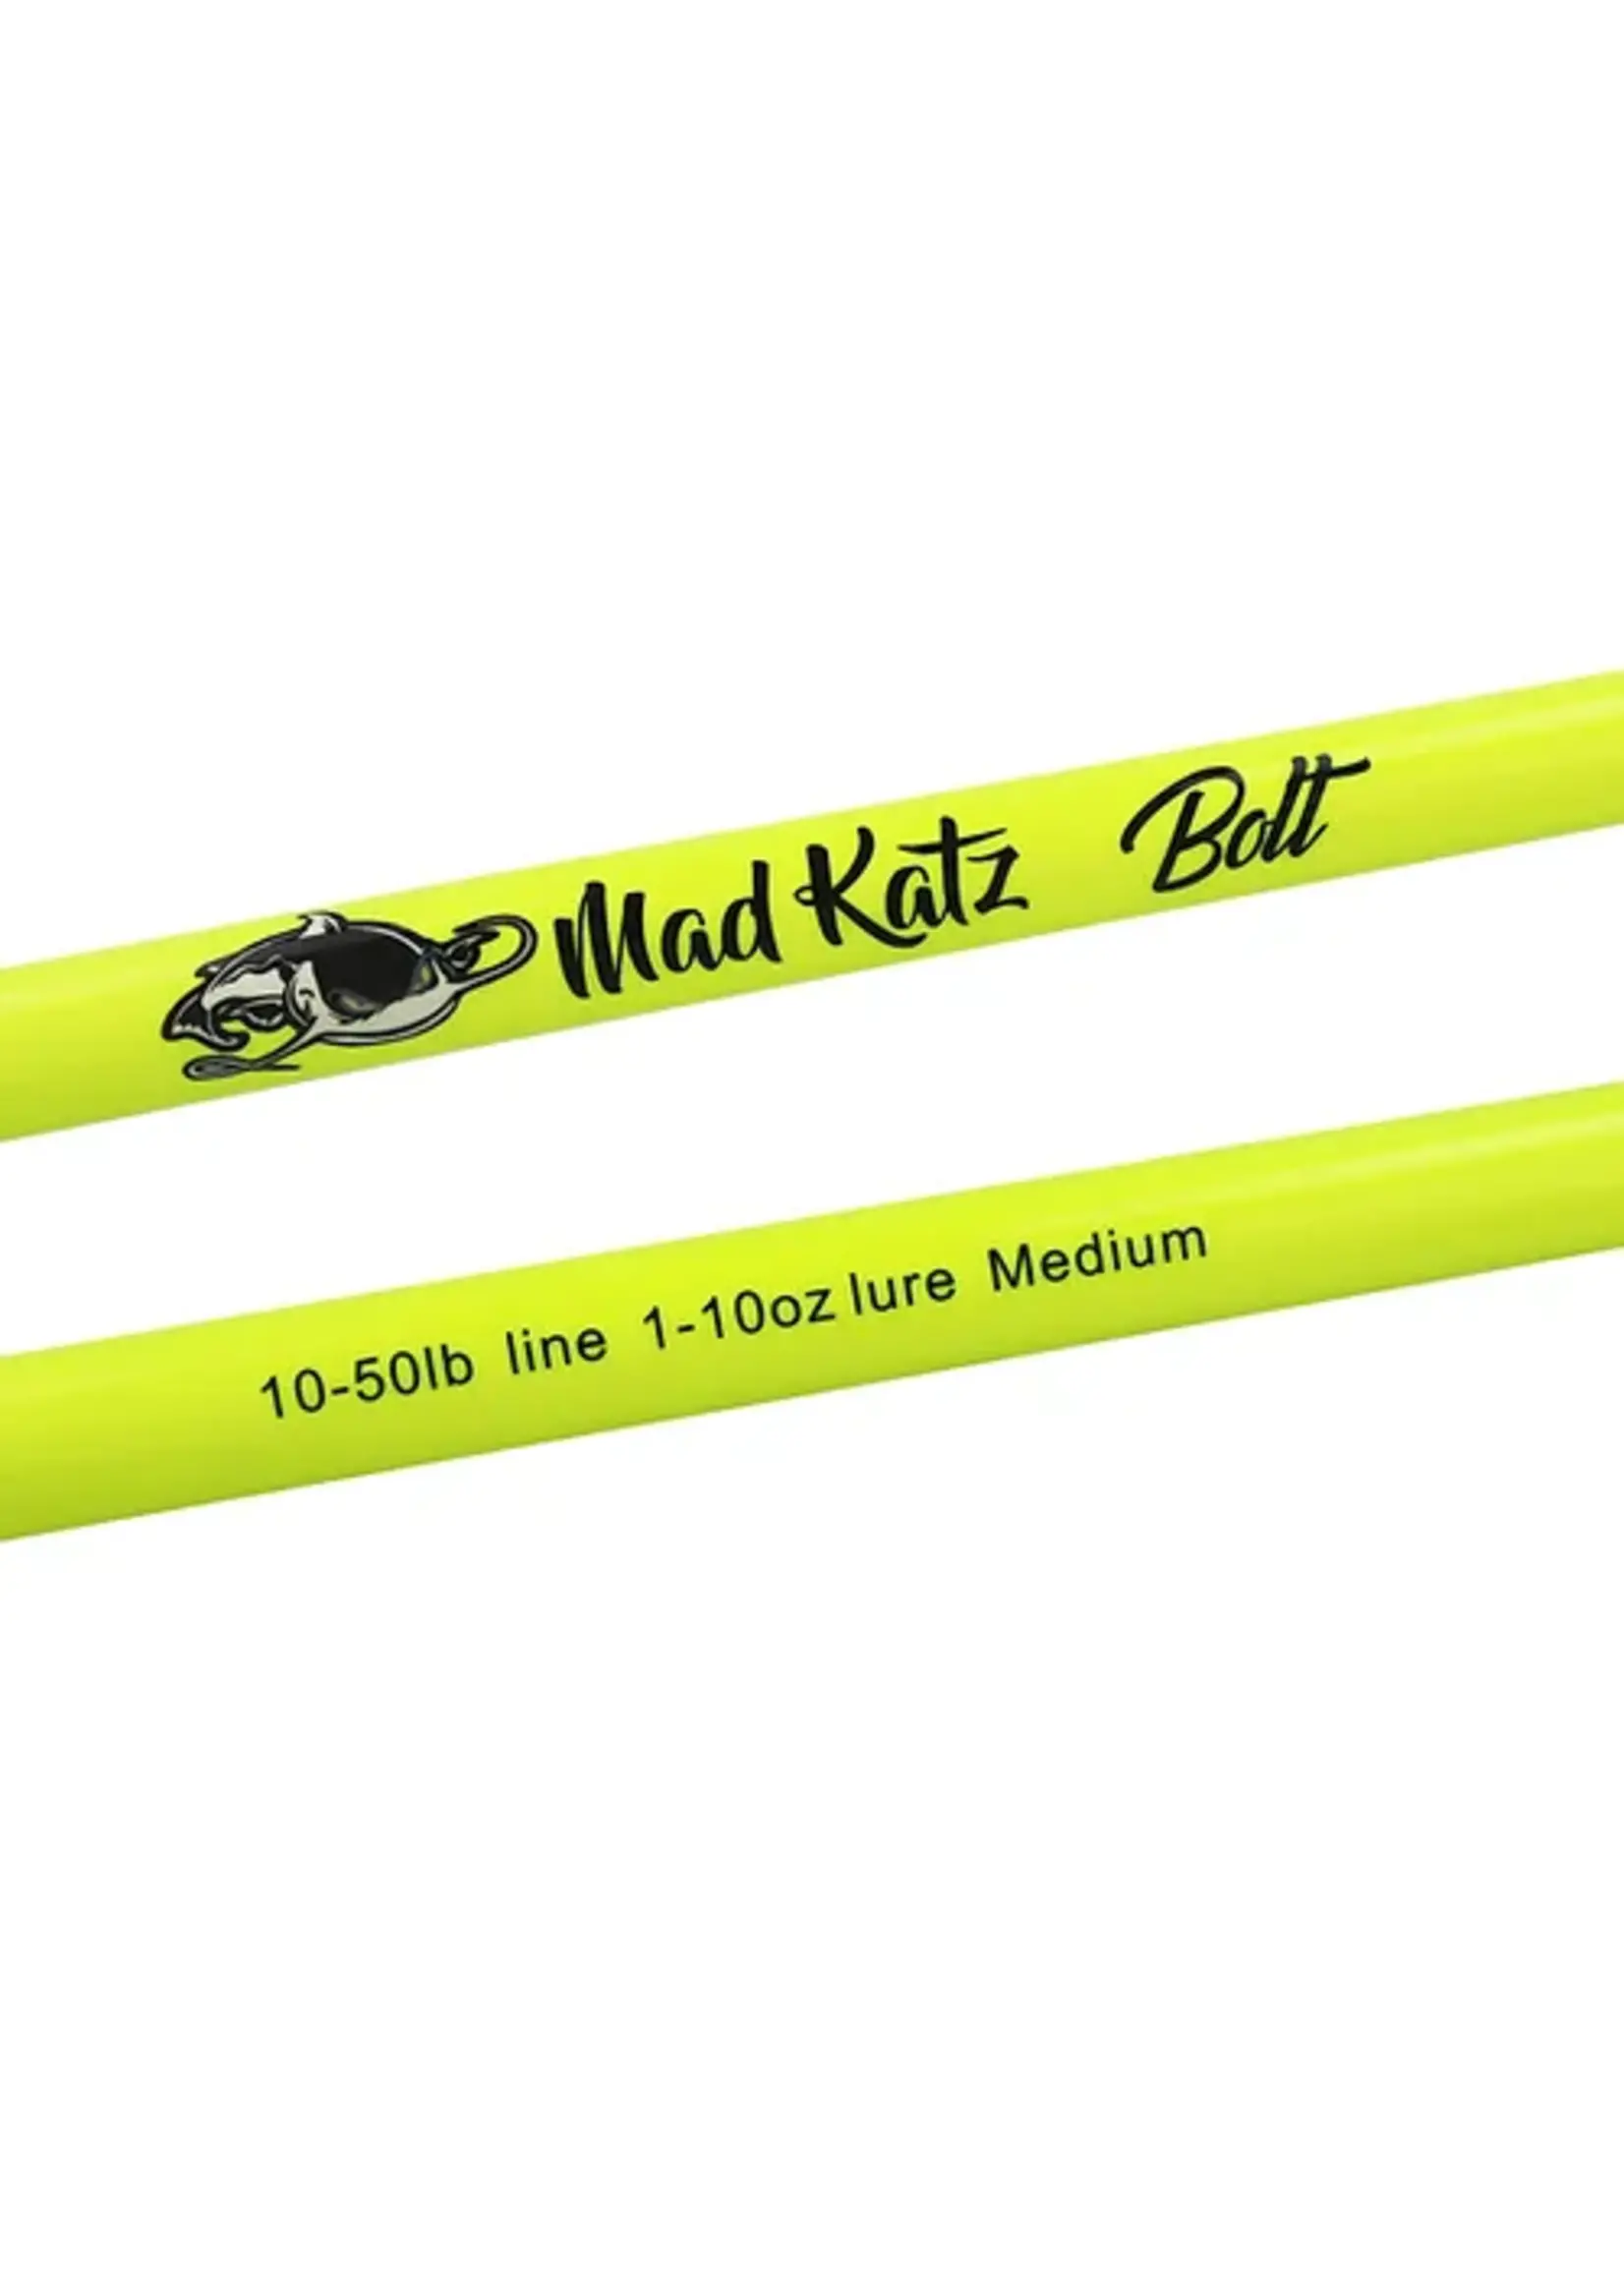 Mad Katz Unlimited  Has anyone use the mad Katz rods for anything